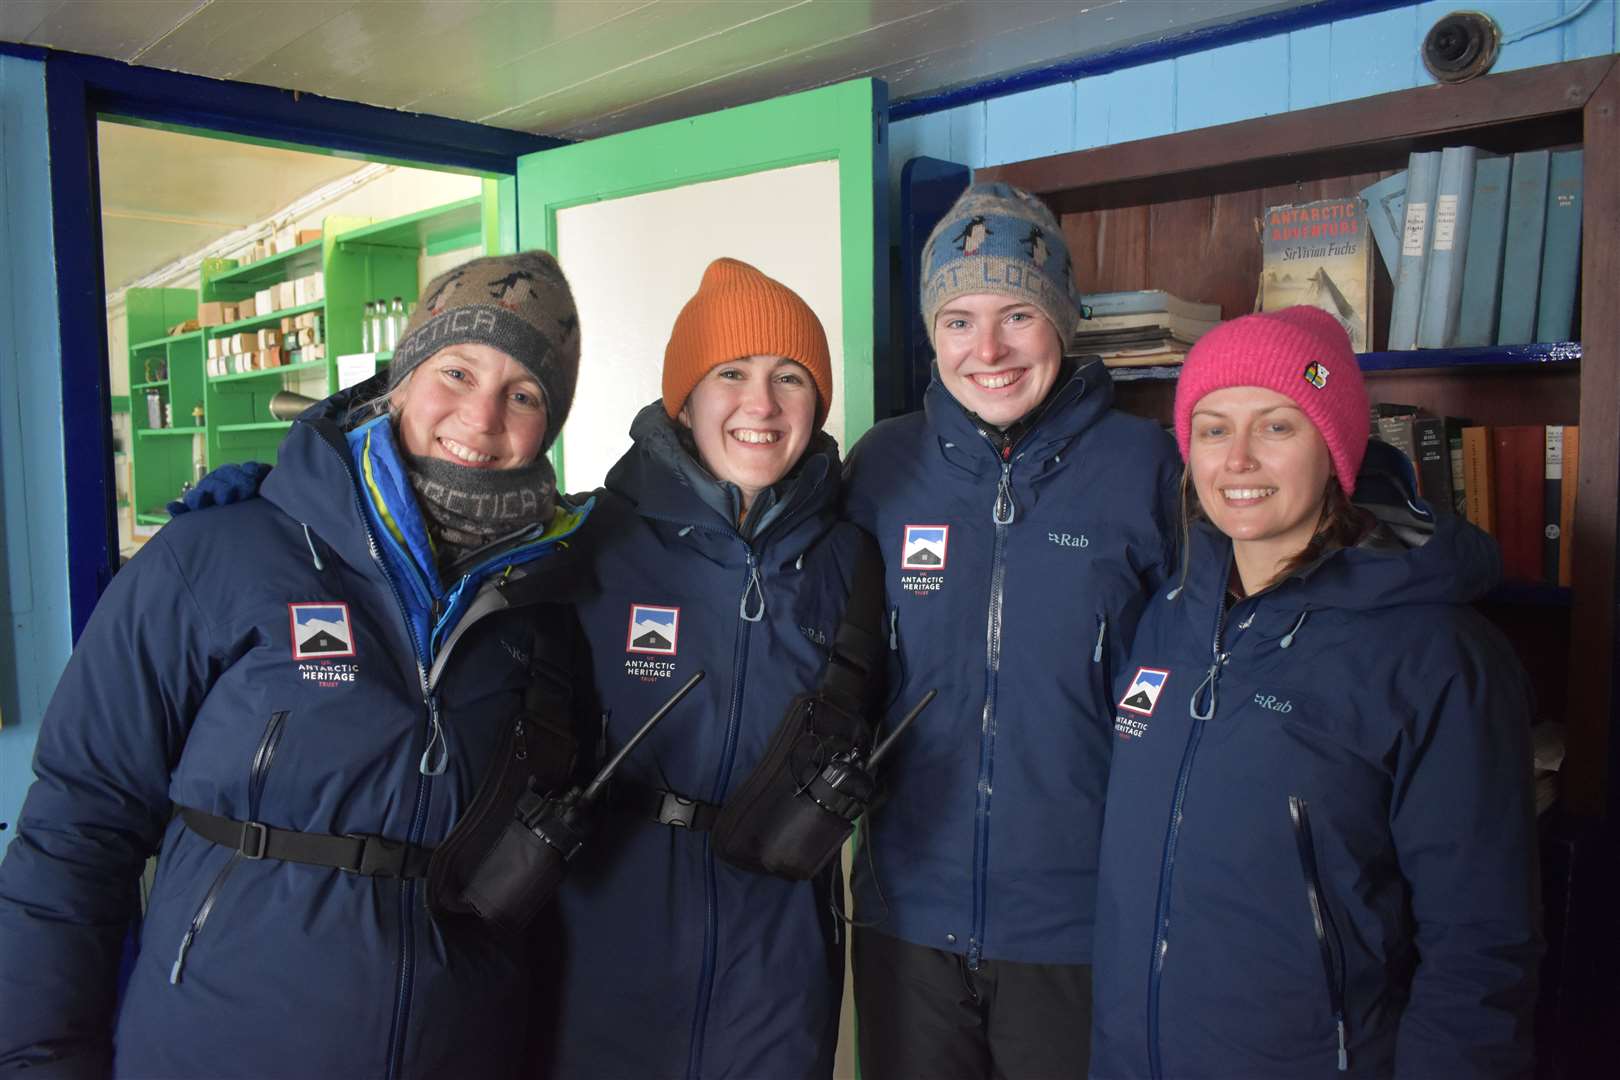 The current Port Lockroy team is, left to right, Lucy Bruzzone, Mairi Hilton, Clare Ballantyne and Natalie Corbett (UKAHT/PA)